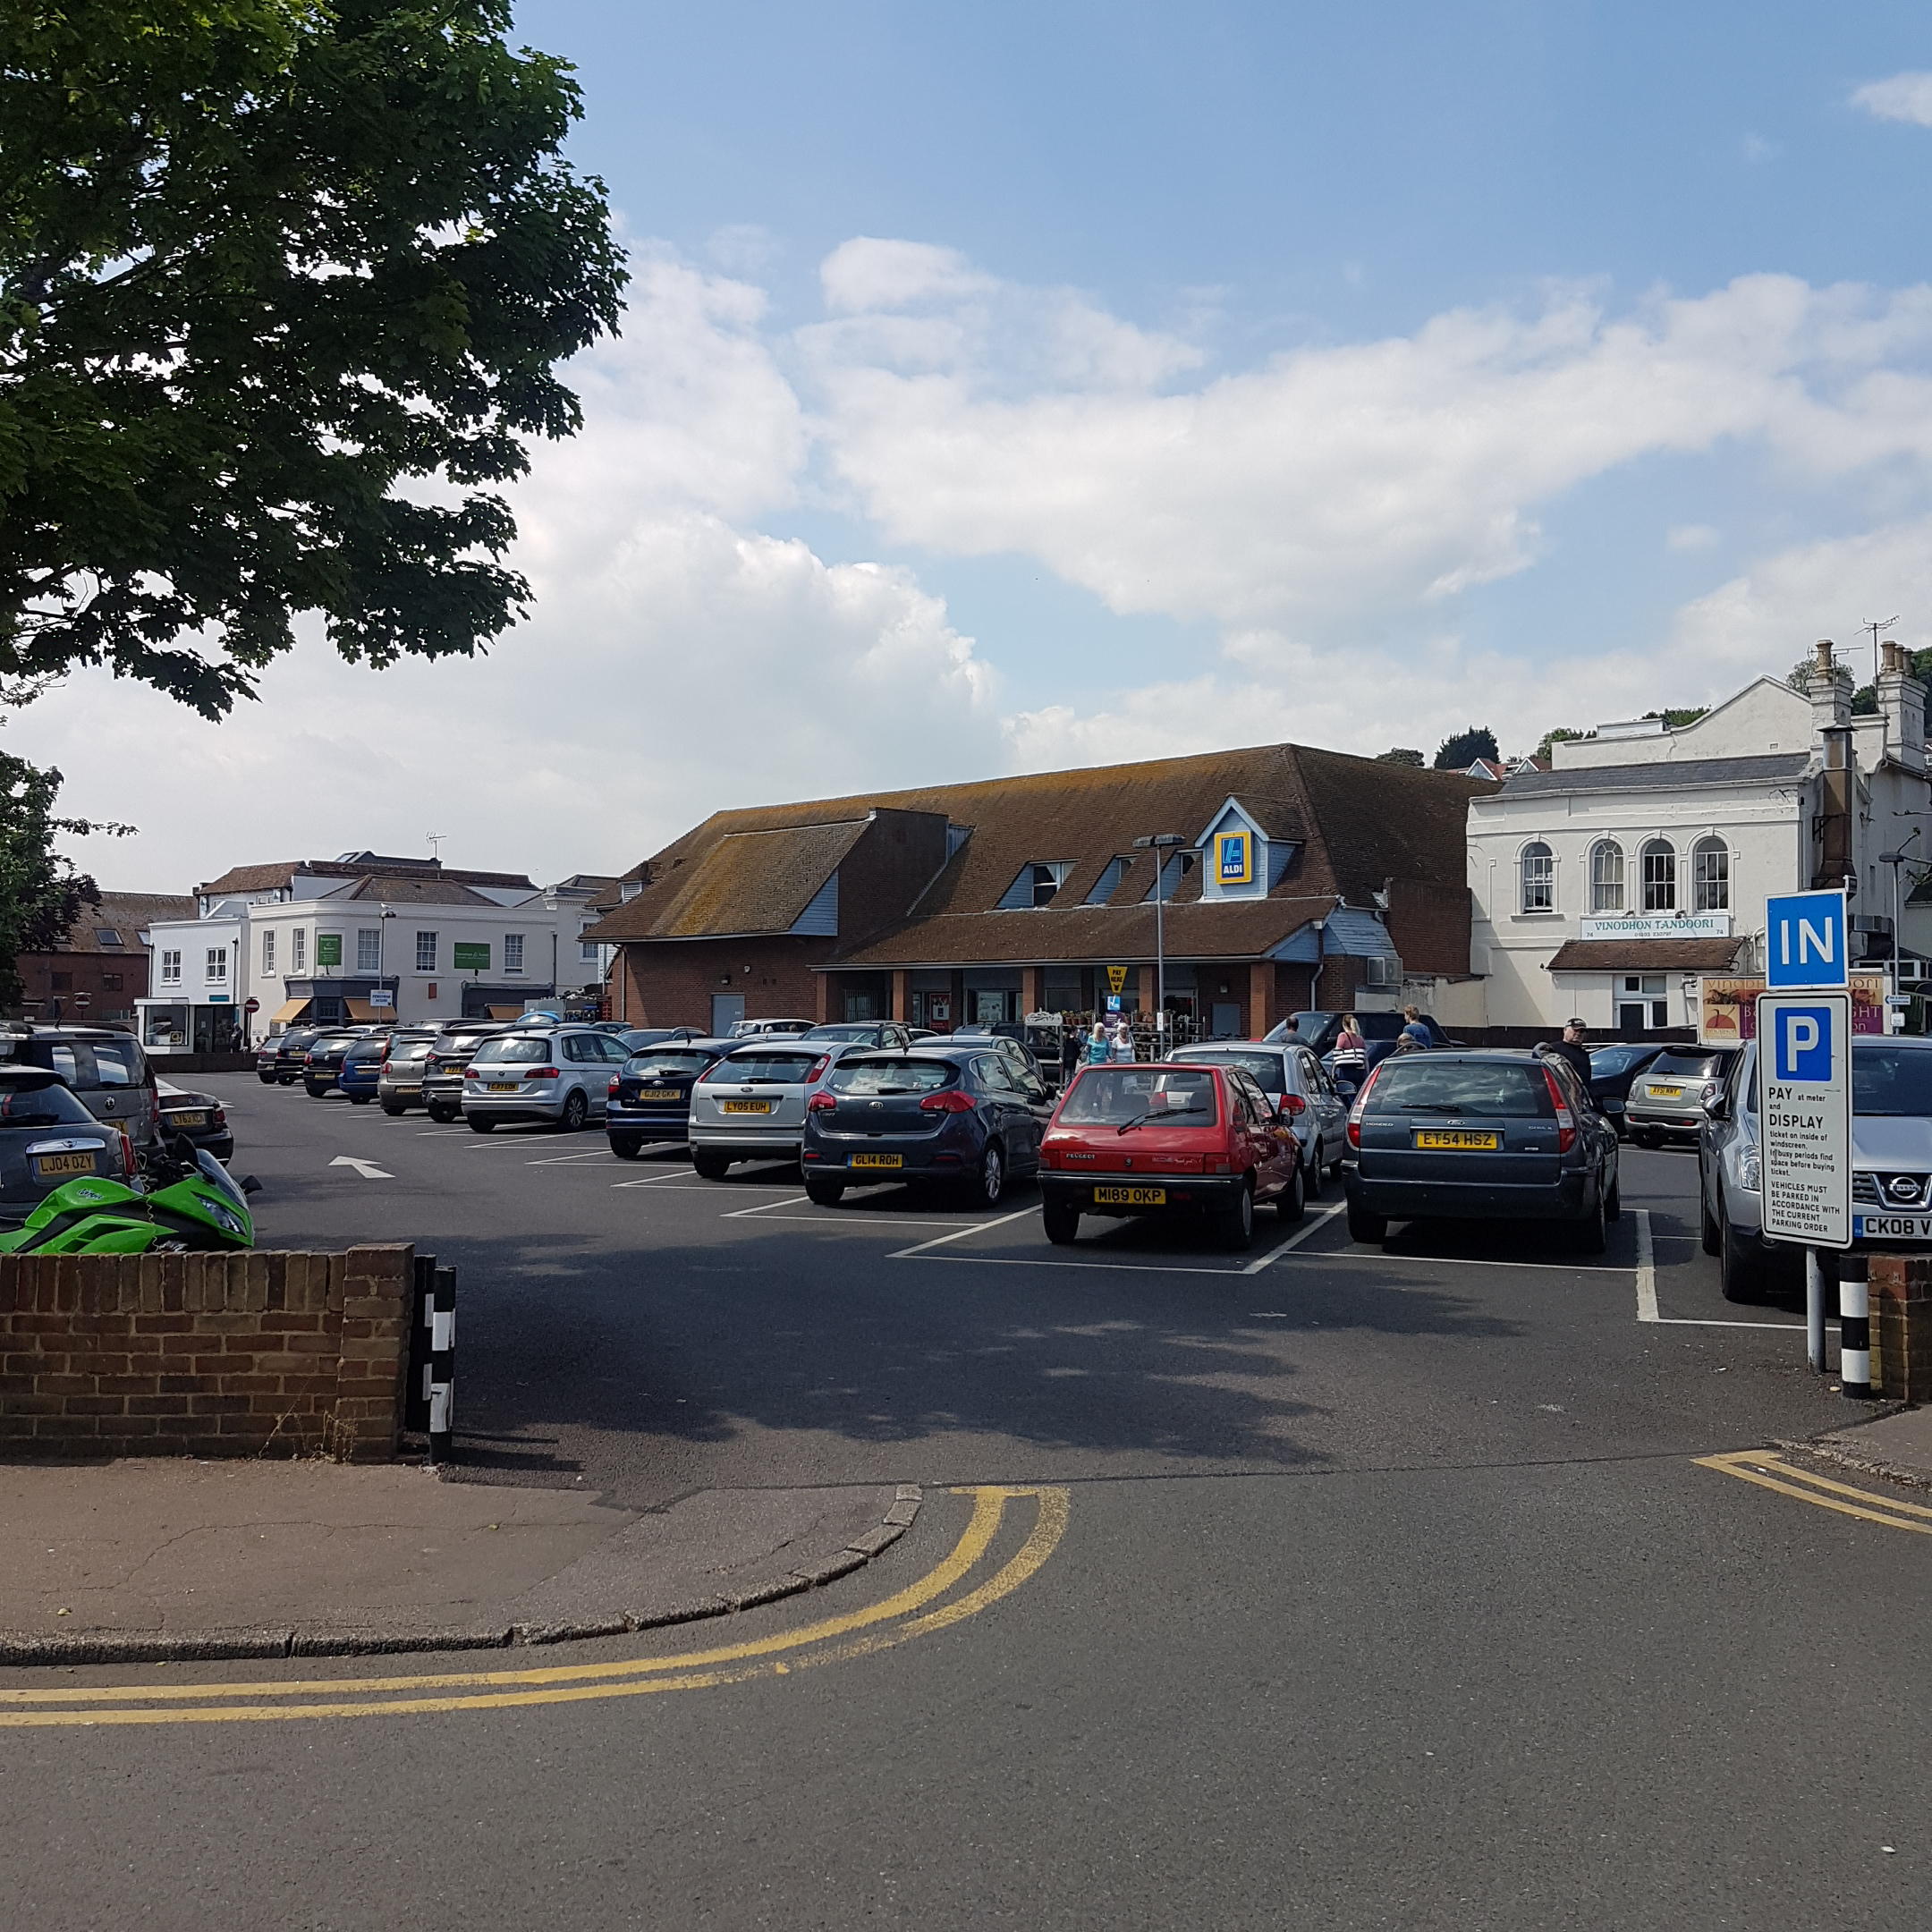 70-72 High Street, Hythe - Picture 2017-11-07-10-04-01